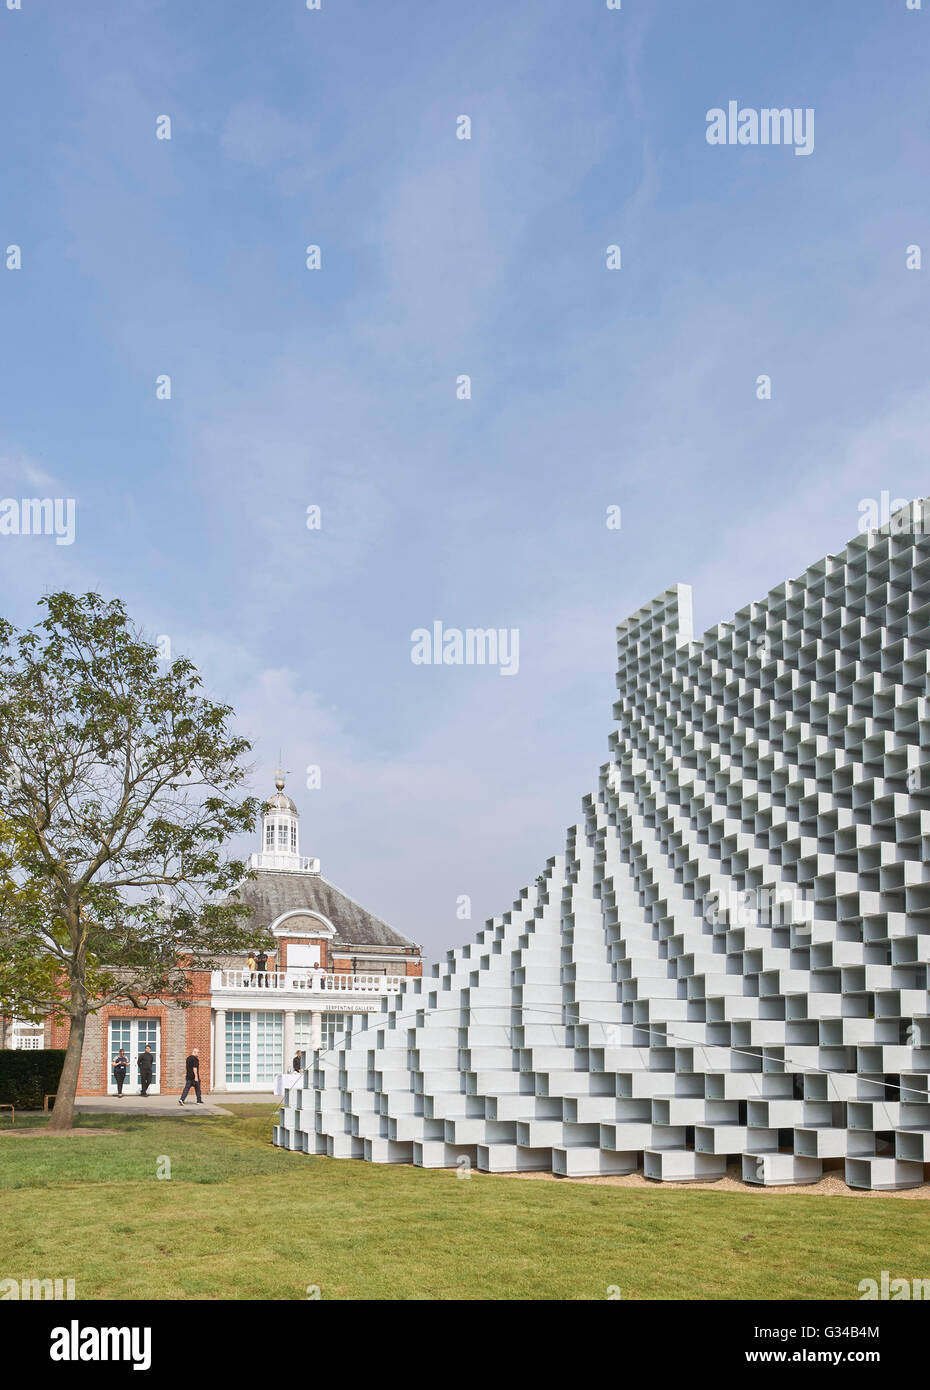 Exterior view of the Serpentine Summer Pavilion 2016 designed by Bjarke Ingels (BIG) outside the Serpentine Gallery, London, UK Stock Photo